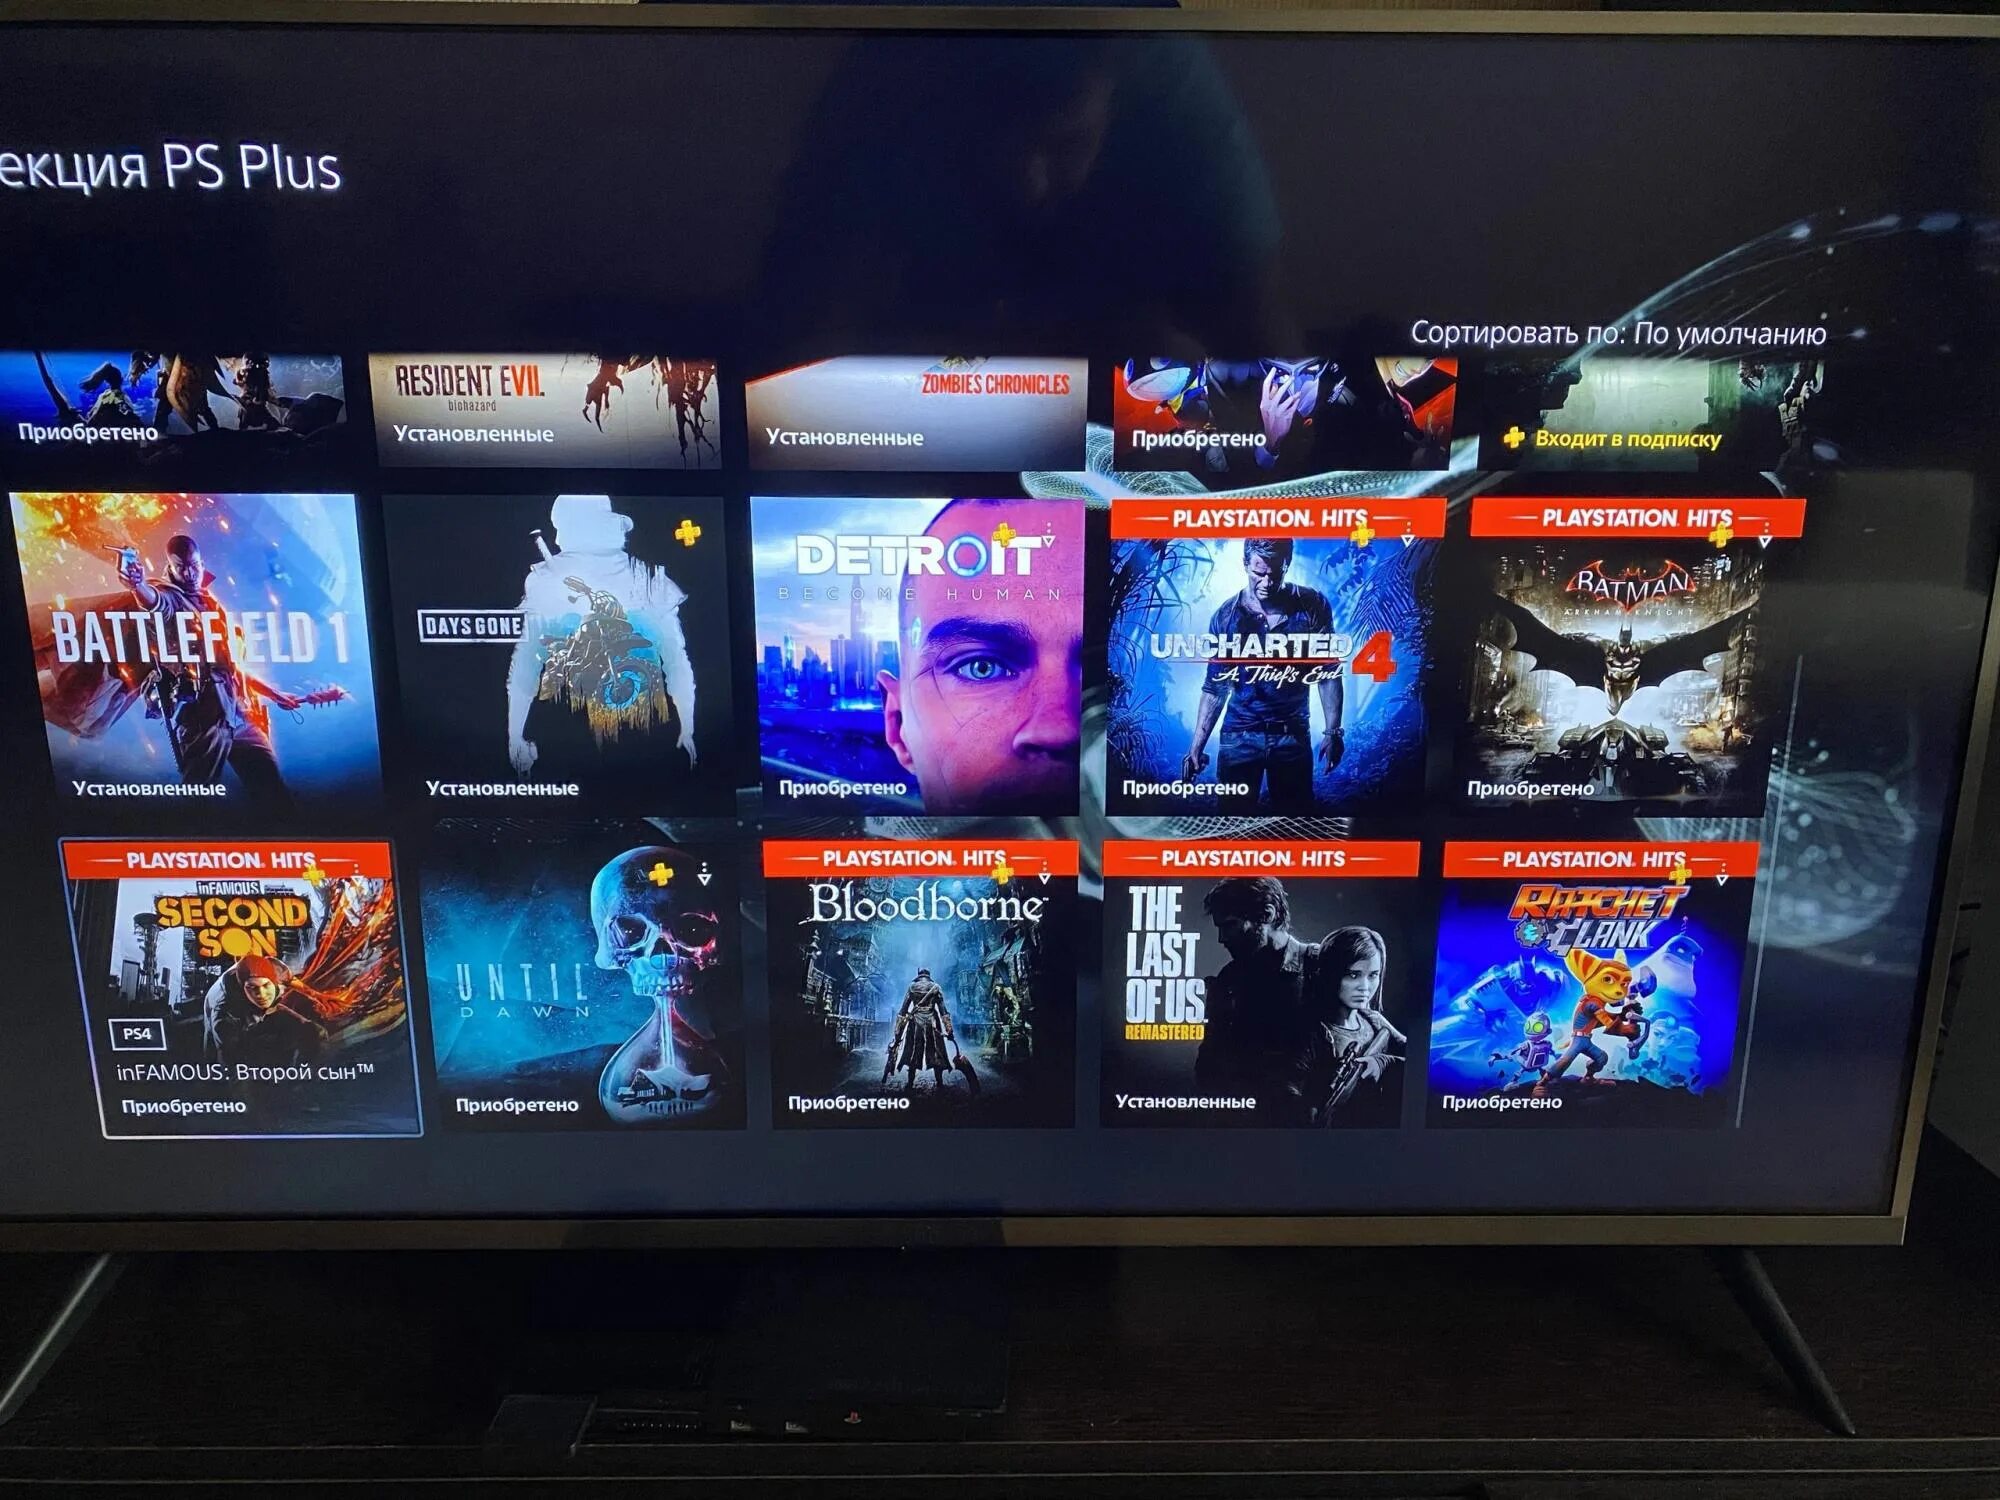 Коллекция игр PS collection ps5. Коллекция PS Plus на ps5. Коллекция PS Plus на ps5 диски. 20 Игр PS Plus collection.